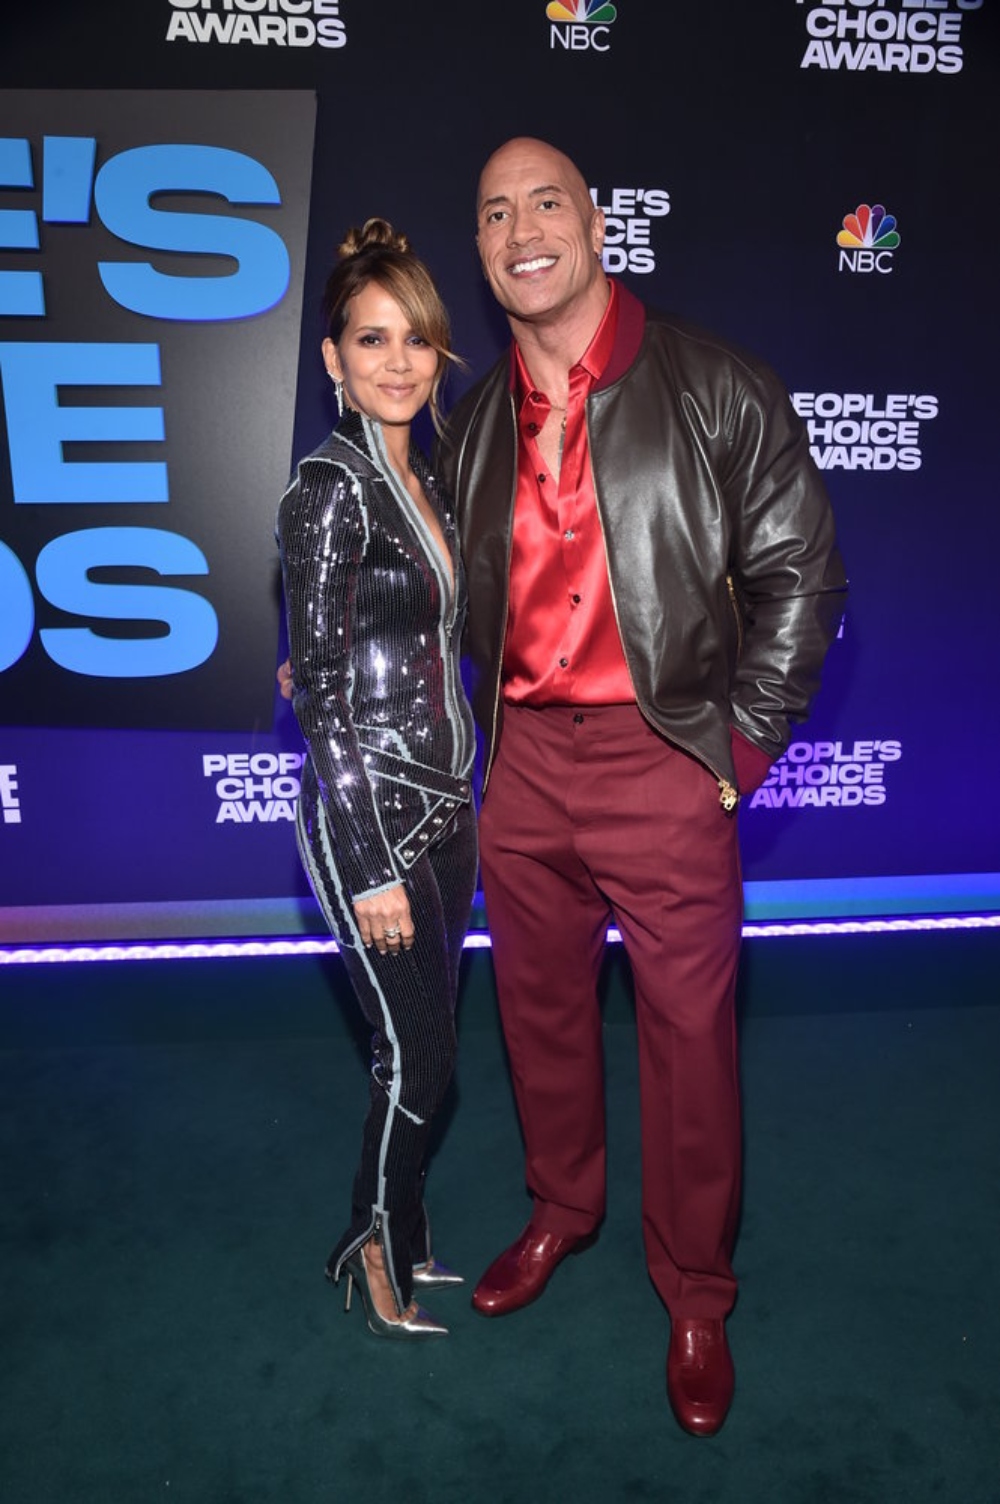 2021 PEOPLES CHOICE AWARDS Pictured l r Halle Berry and Dwayne Johnson Photo by Alberto Rodriguez E Entertainment NBC Ovo je lista pobednika dodele nagrada 2021 PEOPLES CHOICE AWARDS